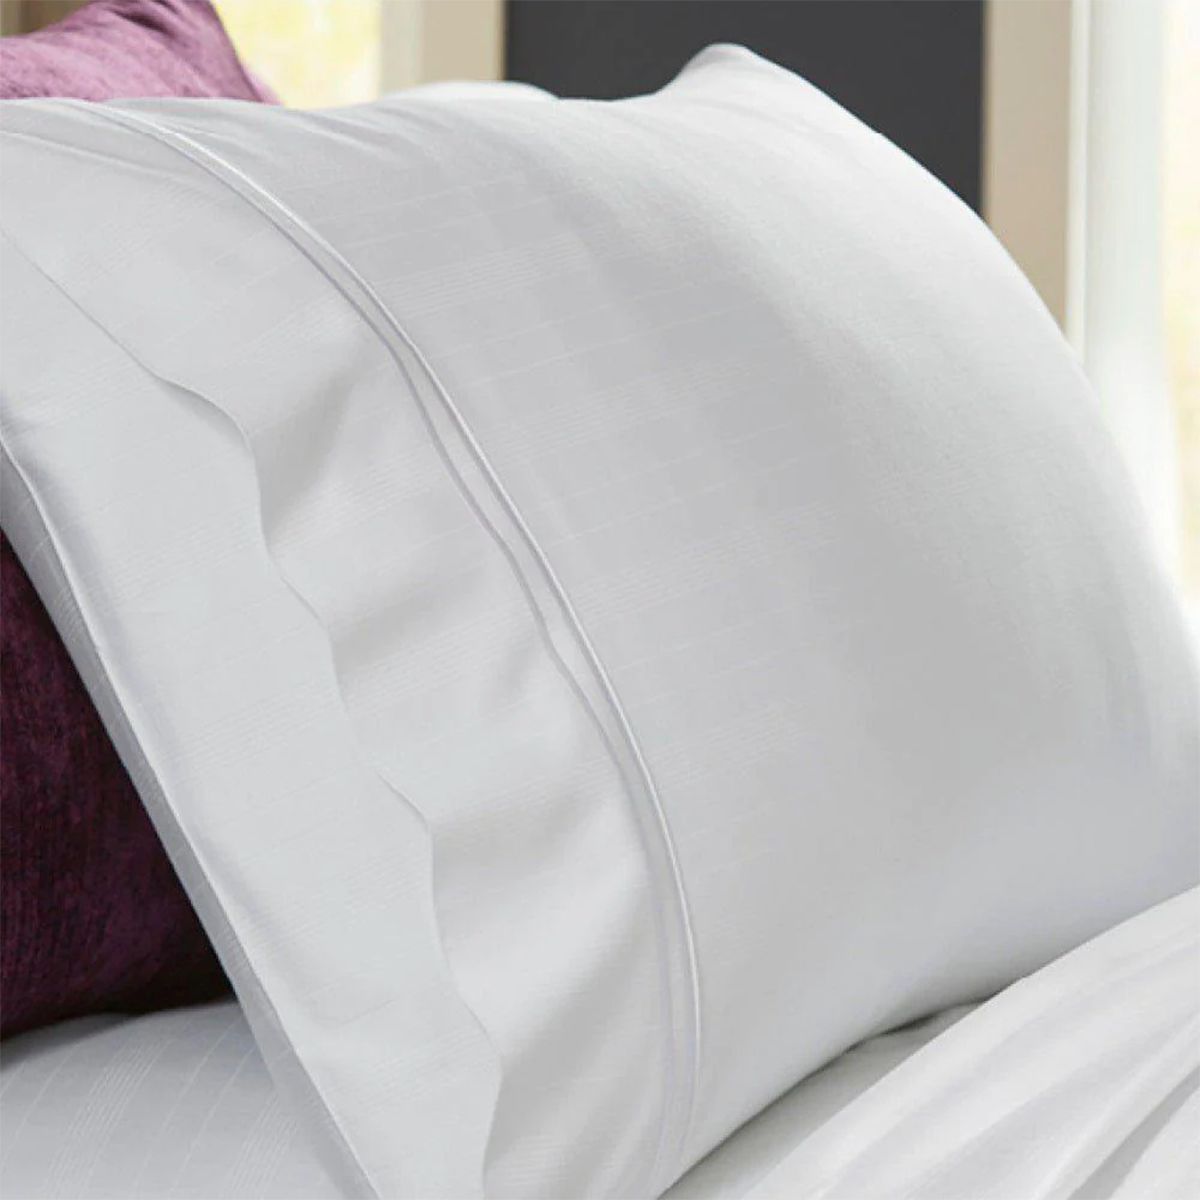 Bamboo Pillow Case Set by PureCare White on Pillow